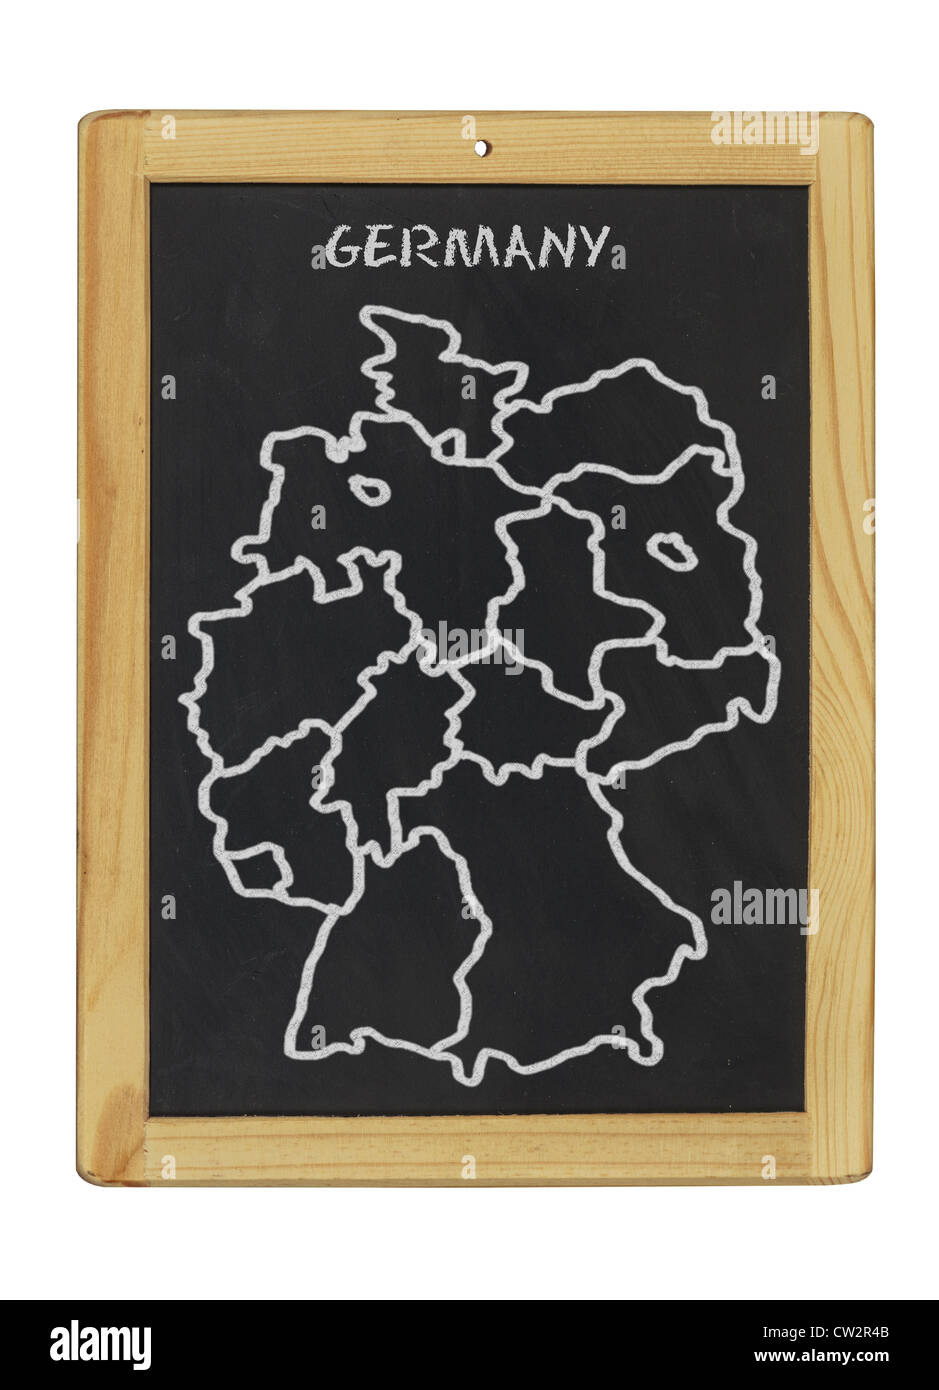 map of germany on a chalkboard Stock Photo